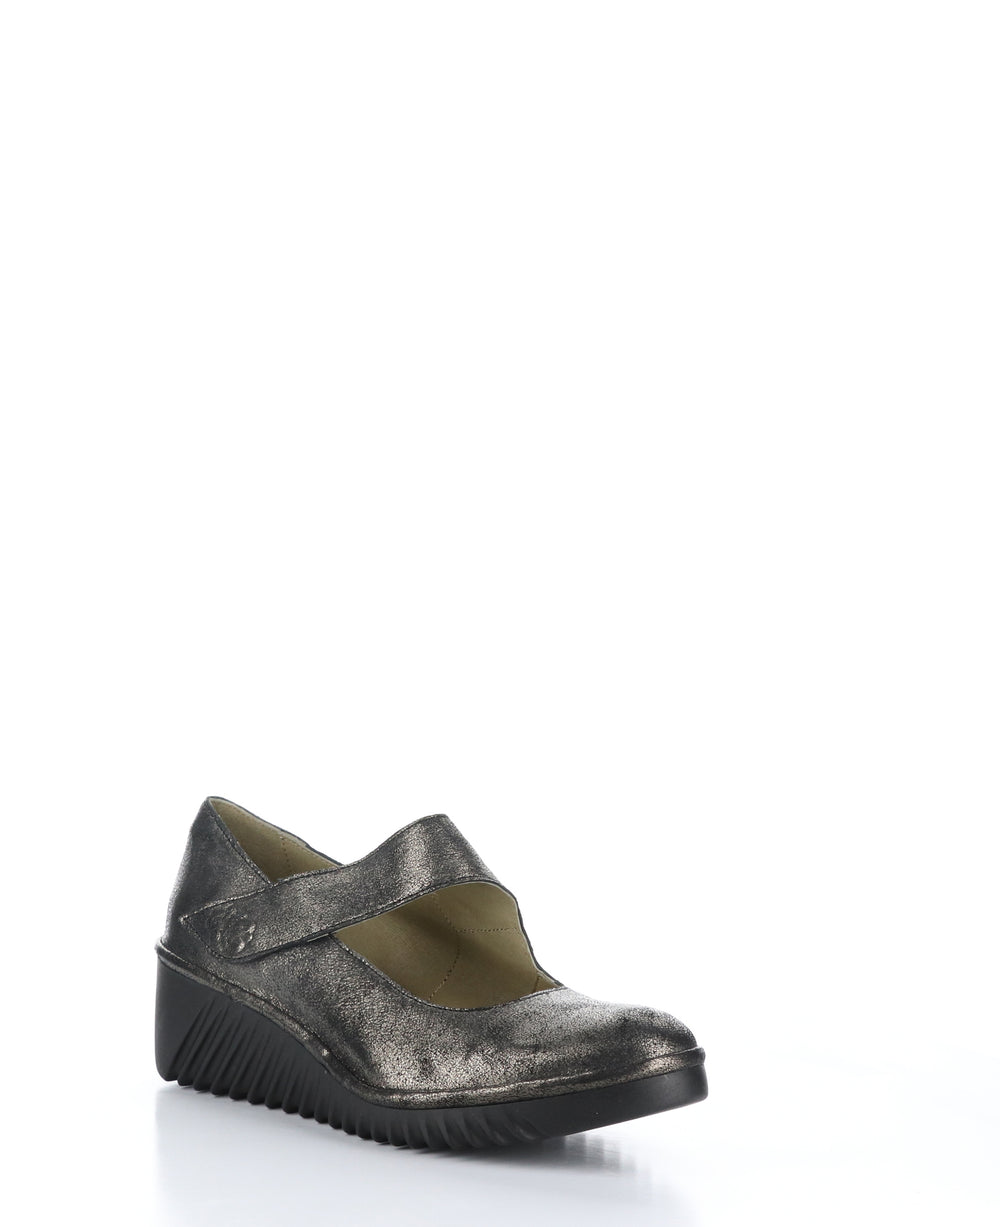 LYKA350FLY Graphite Round Toe Shoes|LYKA350FLY Chaussures à Bout Rond in Gris